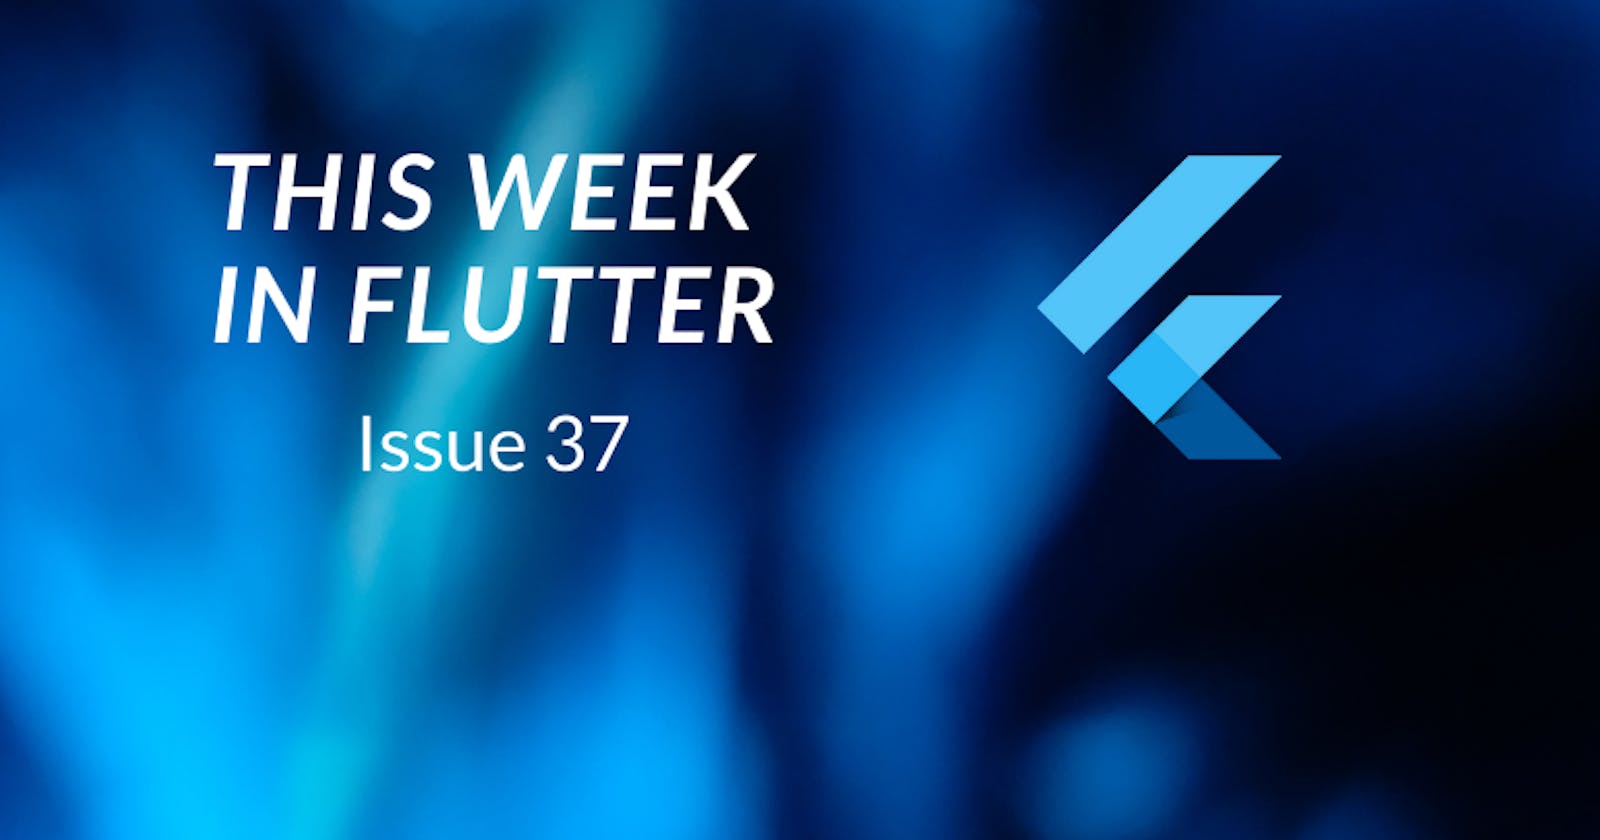 This week in Flutter #37